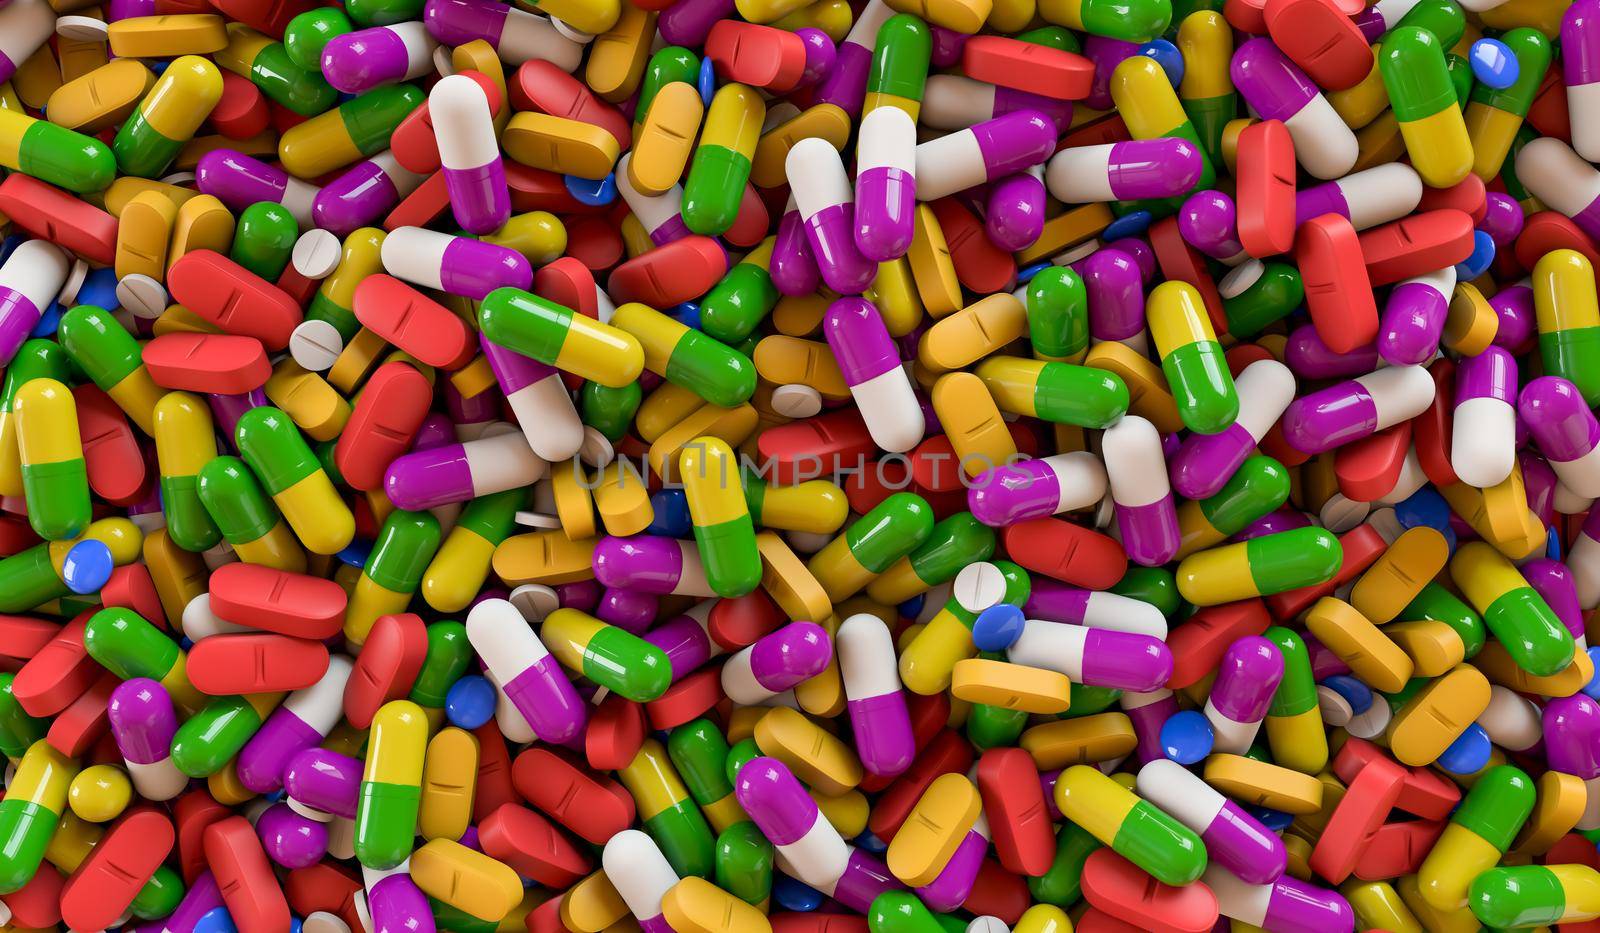 A lot of colorful medication and pills by Valentyn